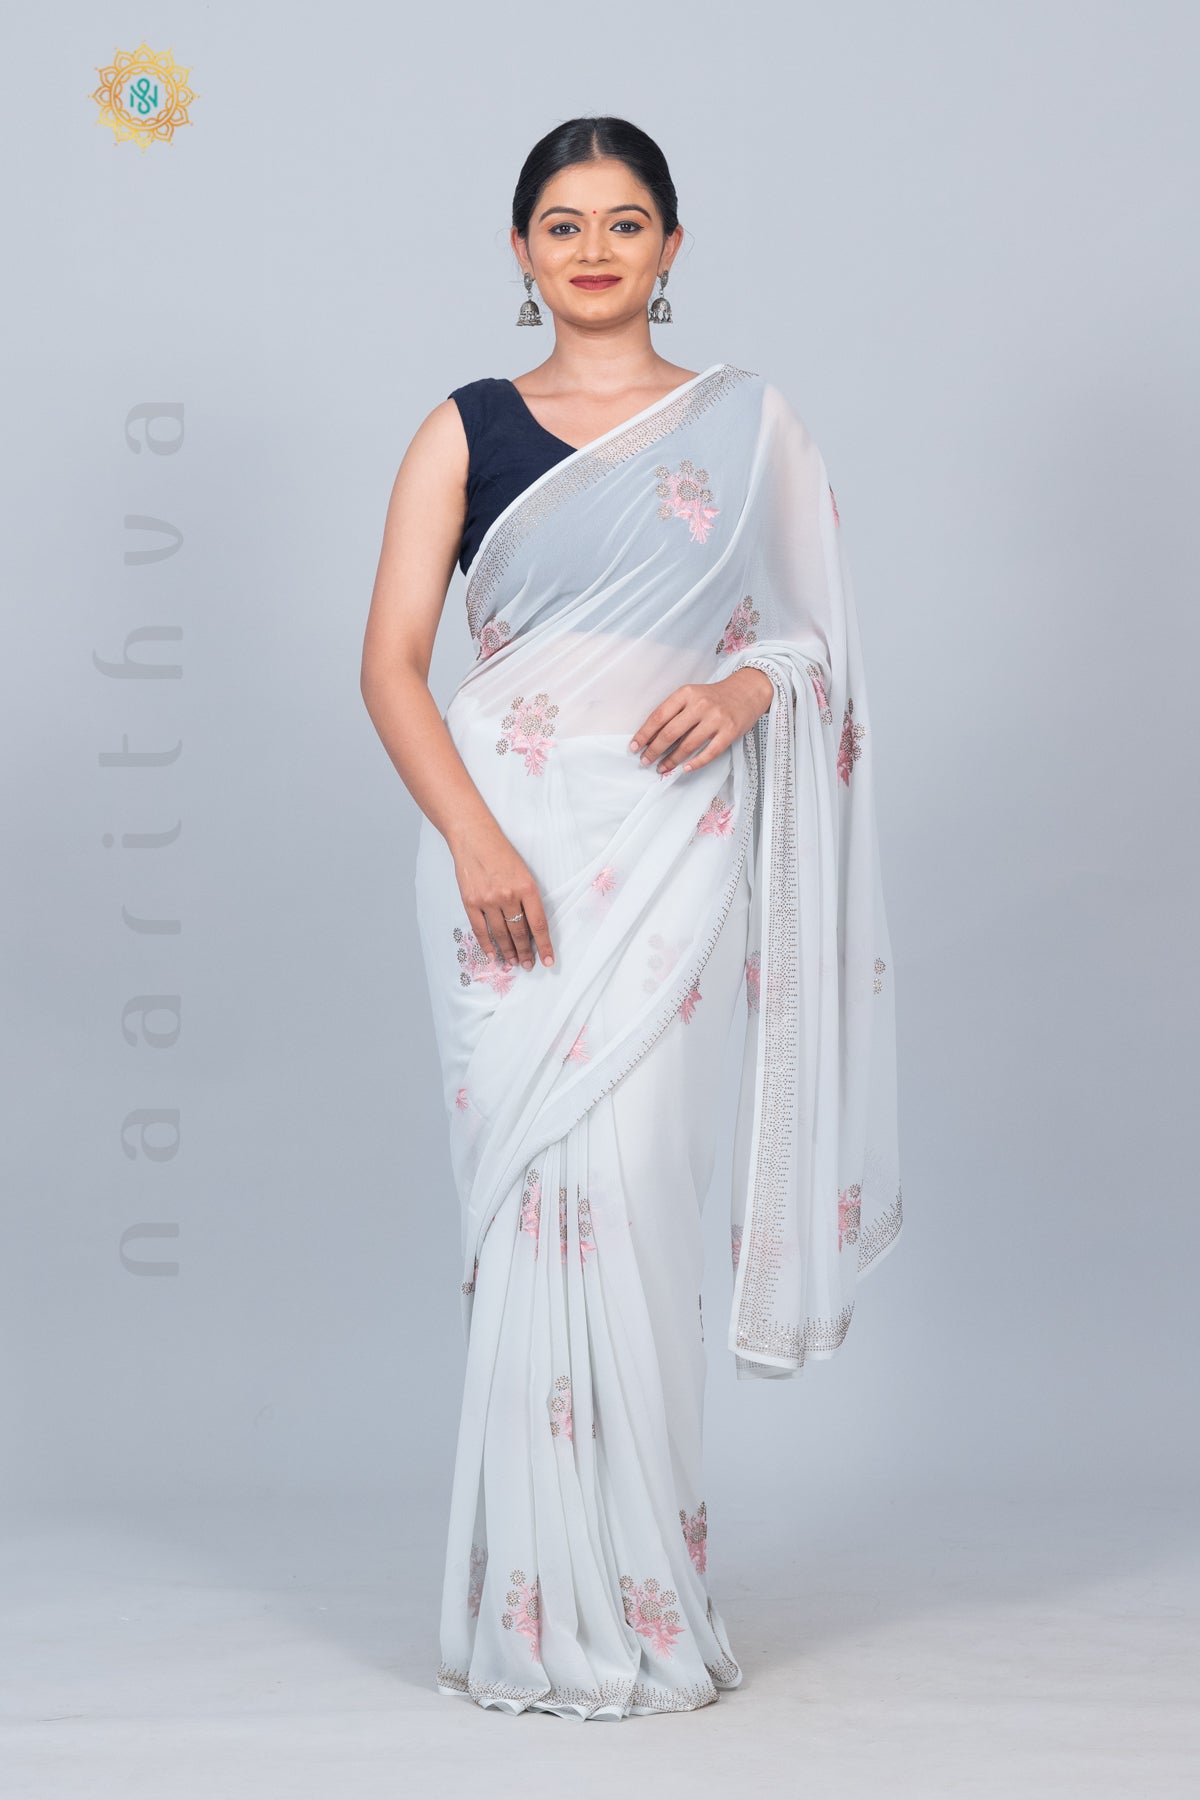 LIGHT BLUE - DESIGNER GEORGETTE SAREE WITH STONE WORK & EMBROIDERY